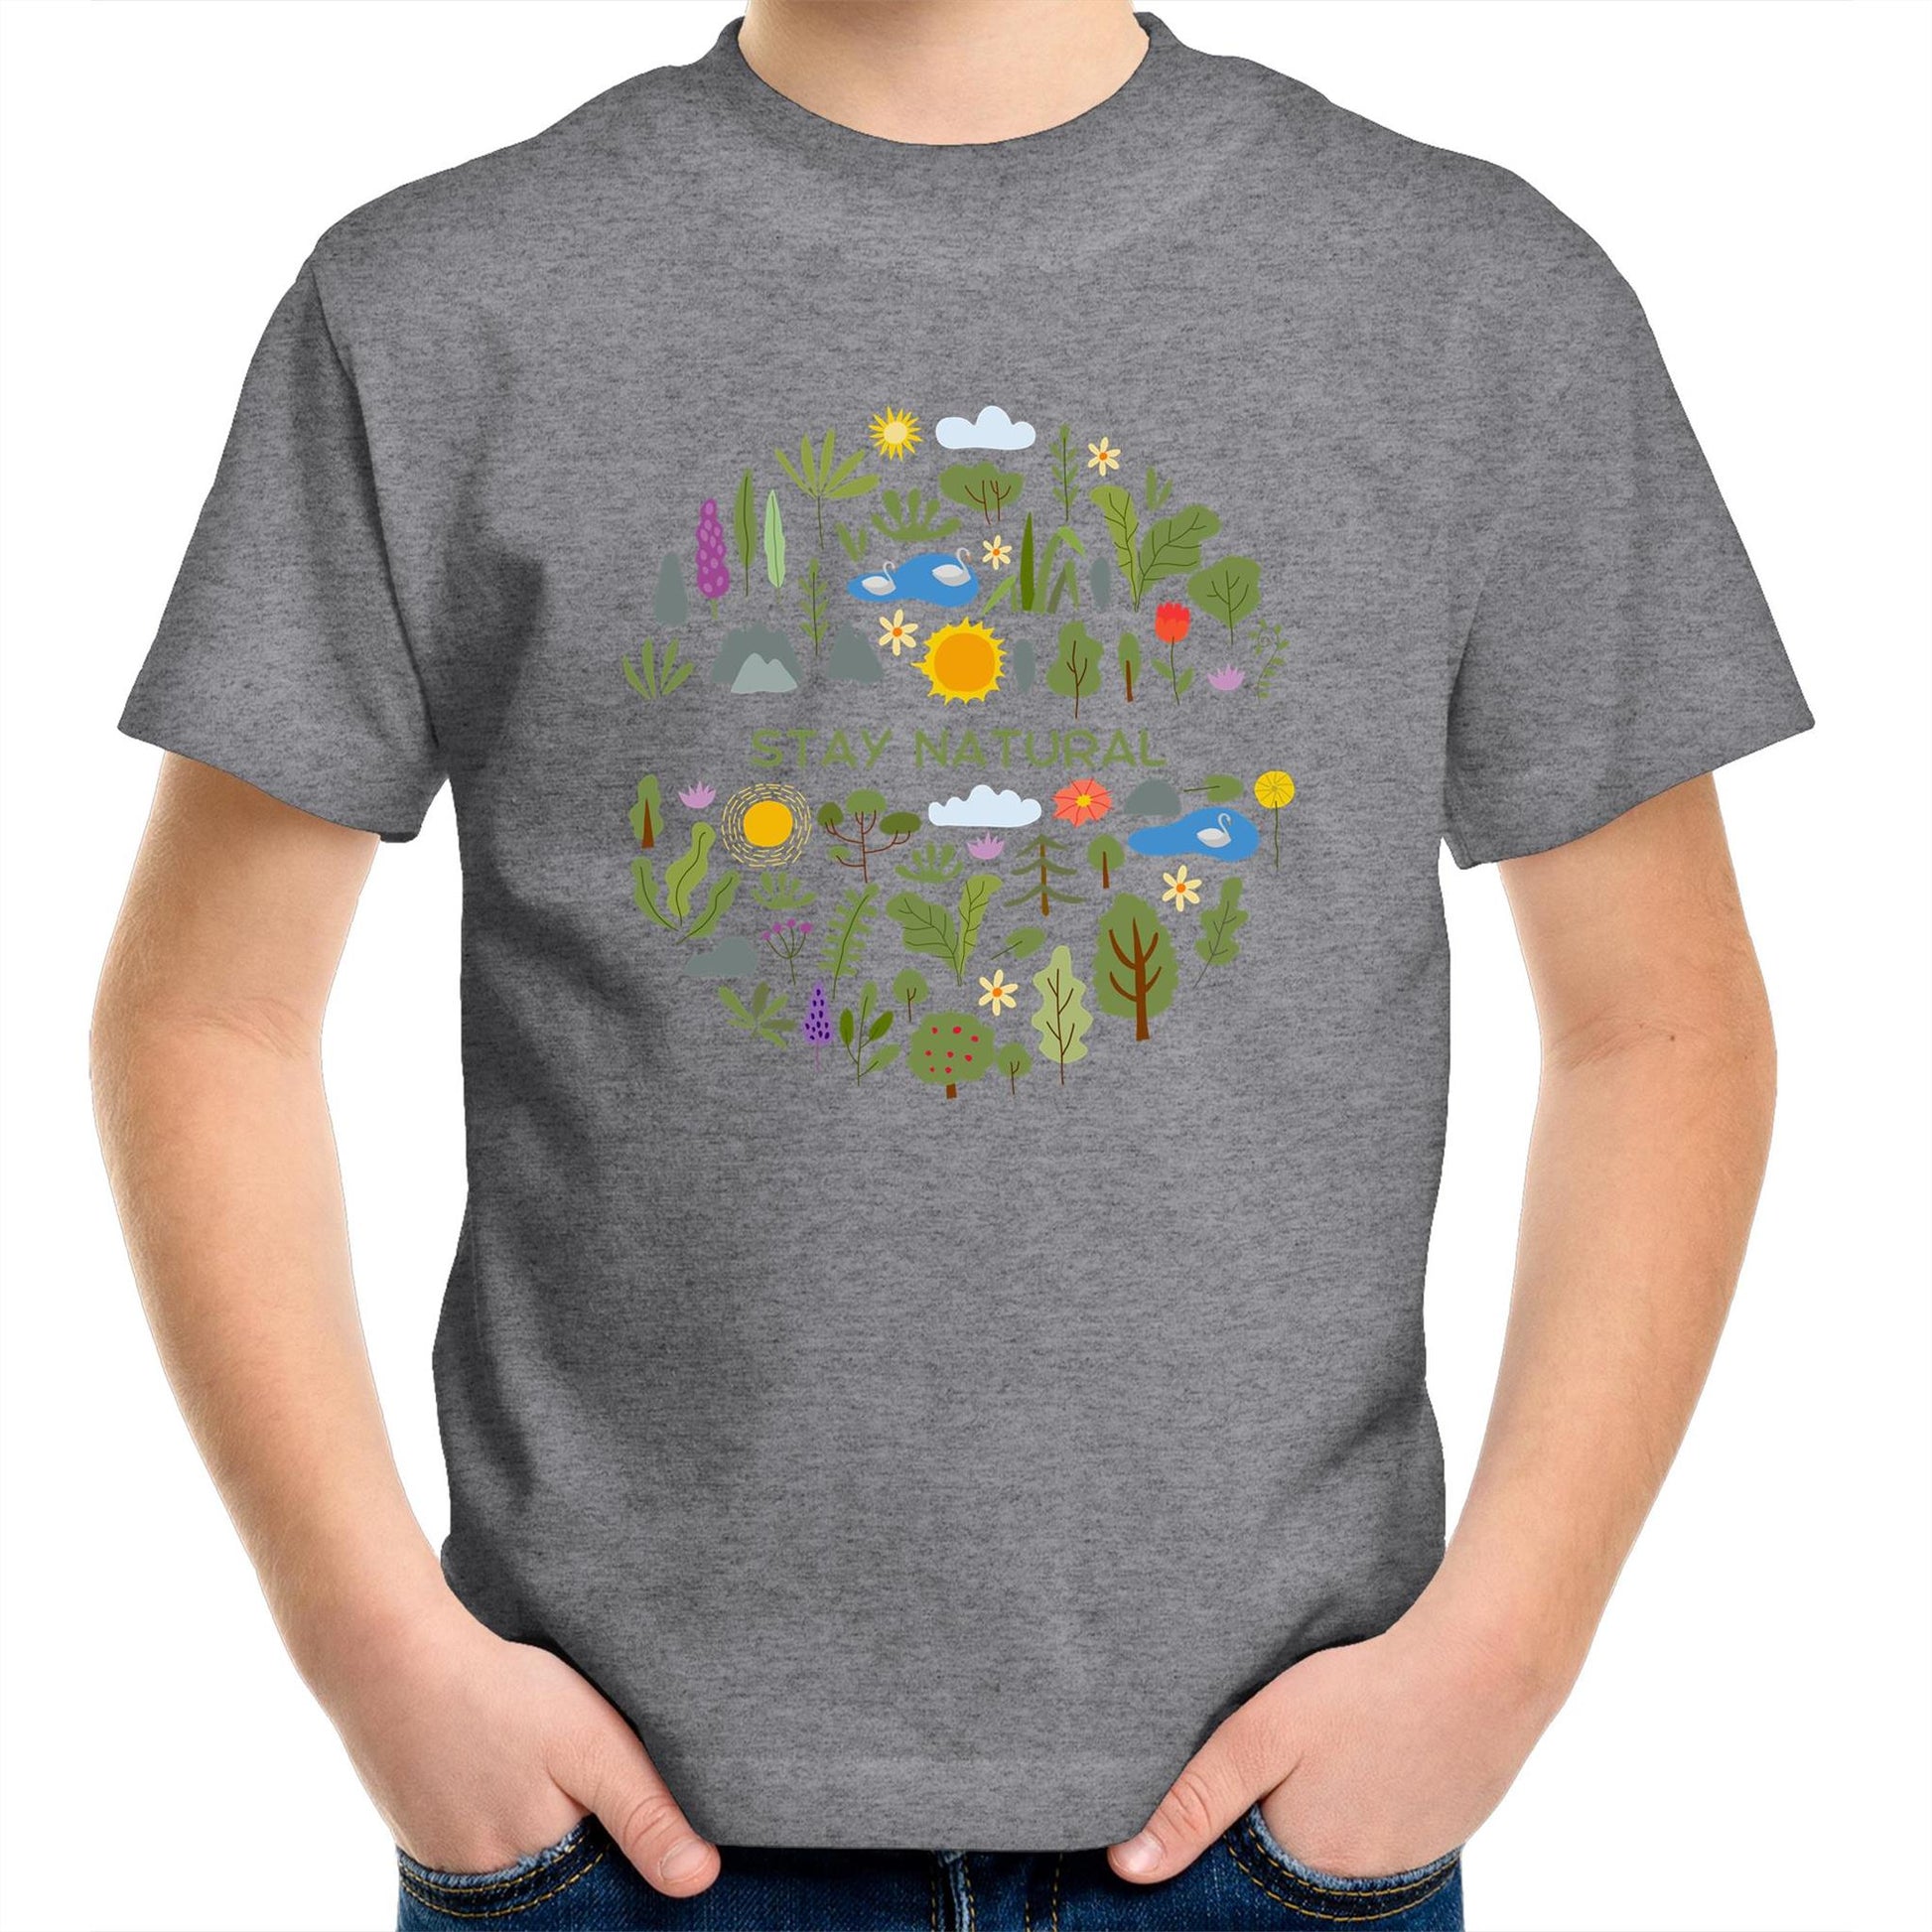 Stay Natural - Kids Youth Crew T-Shirt Grey Marle Kids Youth T-shirt Environment Plants